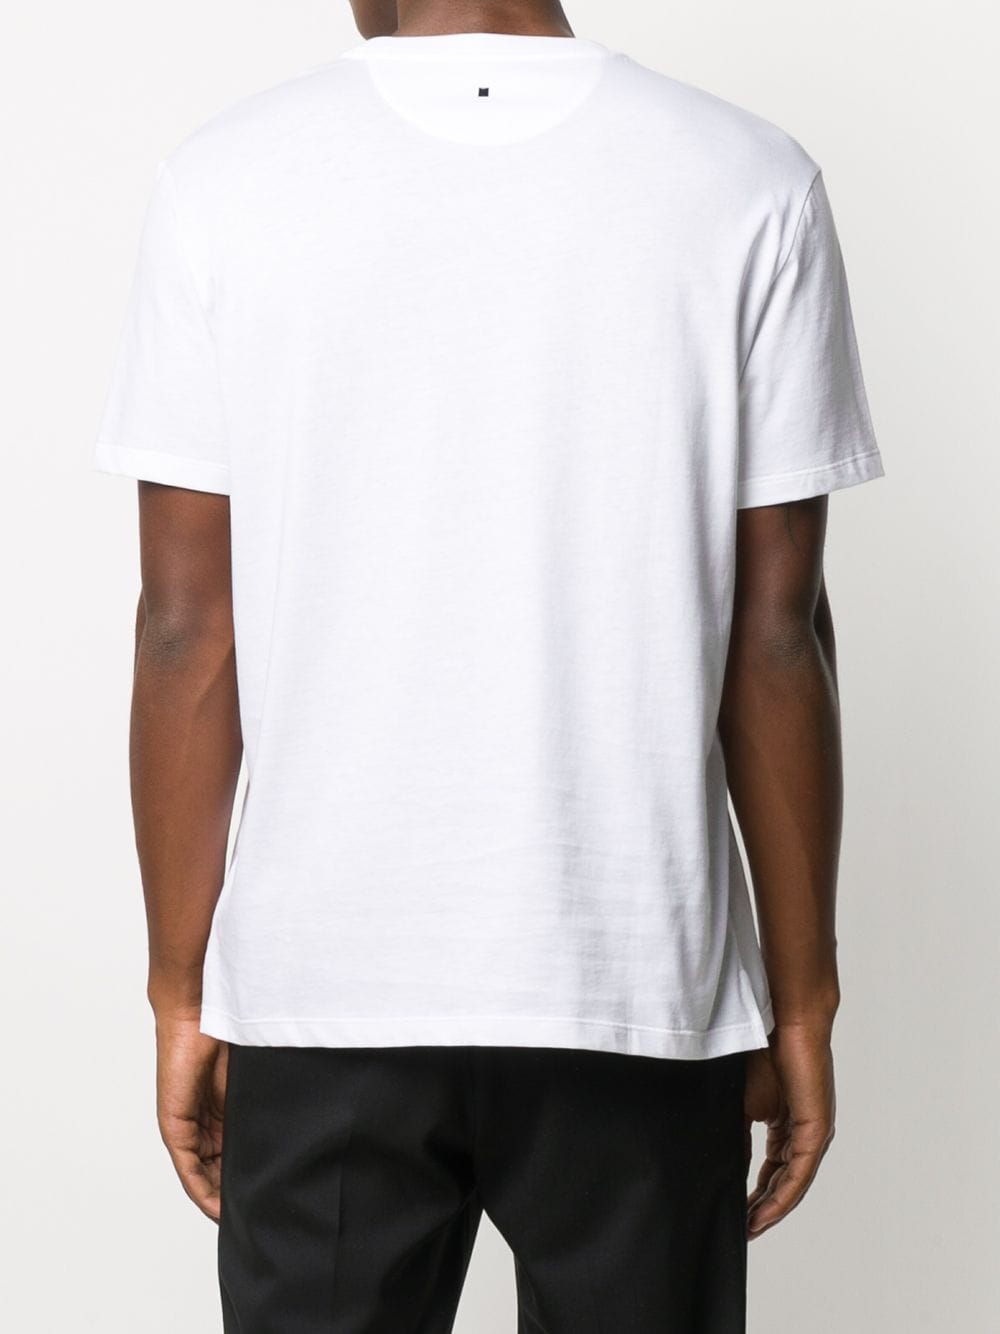 Shop Valentino Bad Lover print T-shirt with Express Delivery - FARFETCH